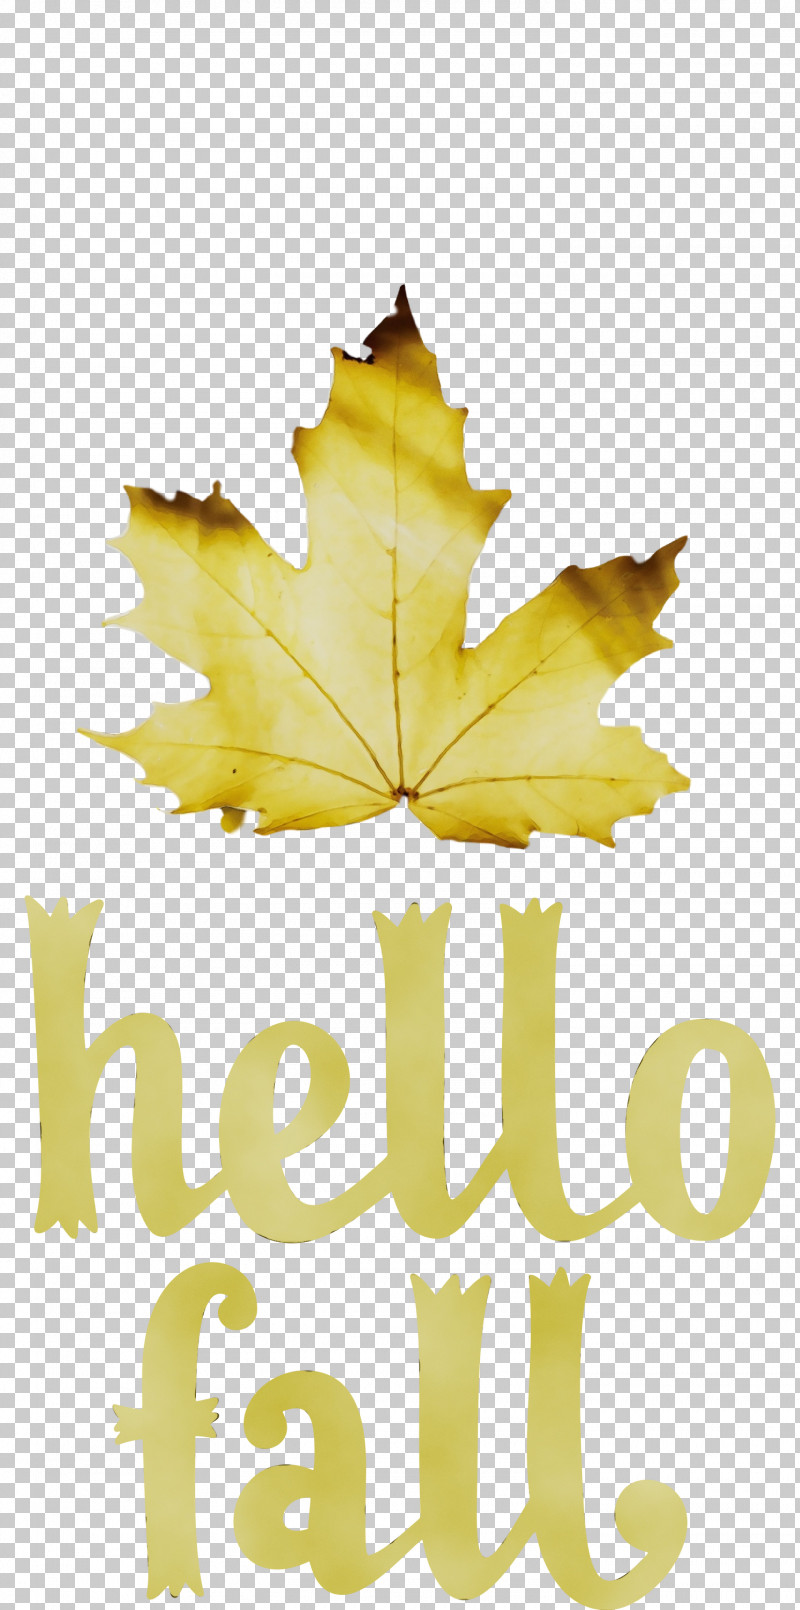 Leaf Maple Leaf / M Yellow Font Tree PNG, Clipart, Autumn, Biology, Fall, Hello Fall, Leaf Free PNG Download